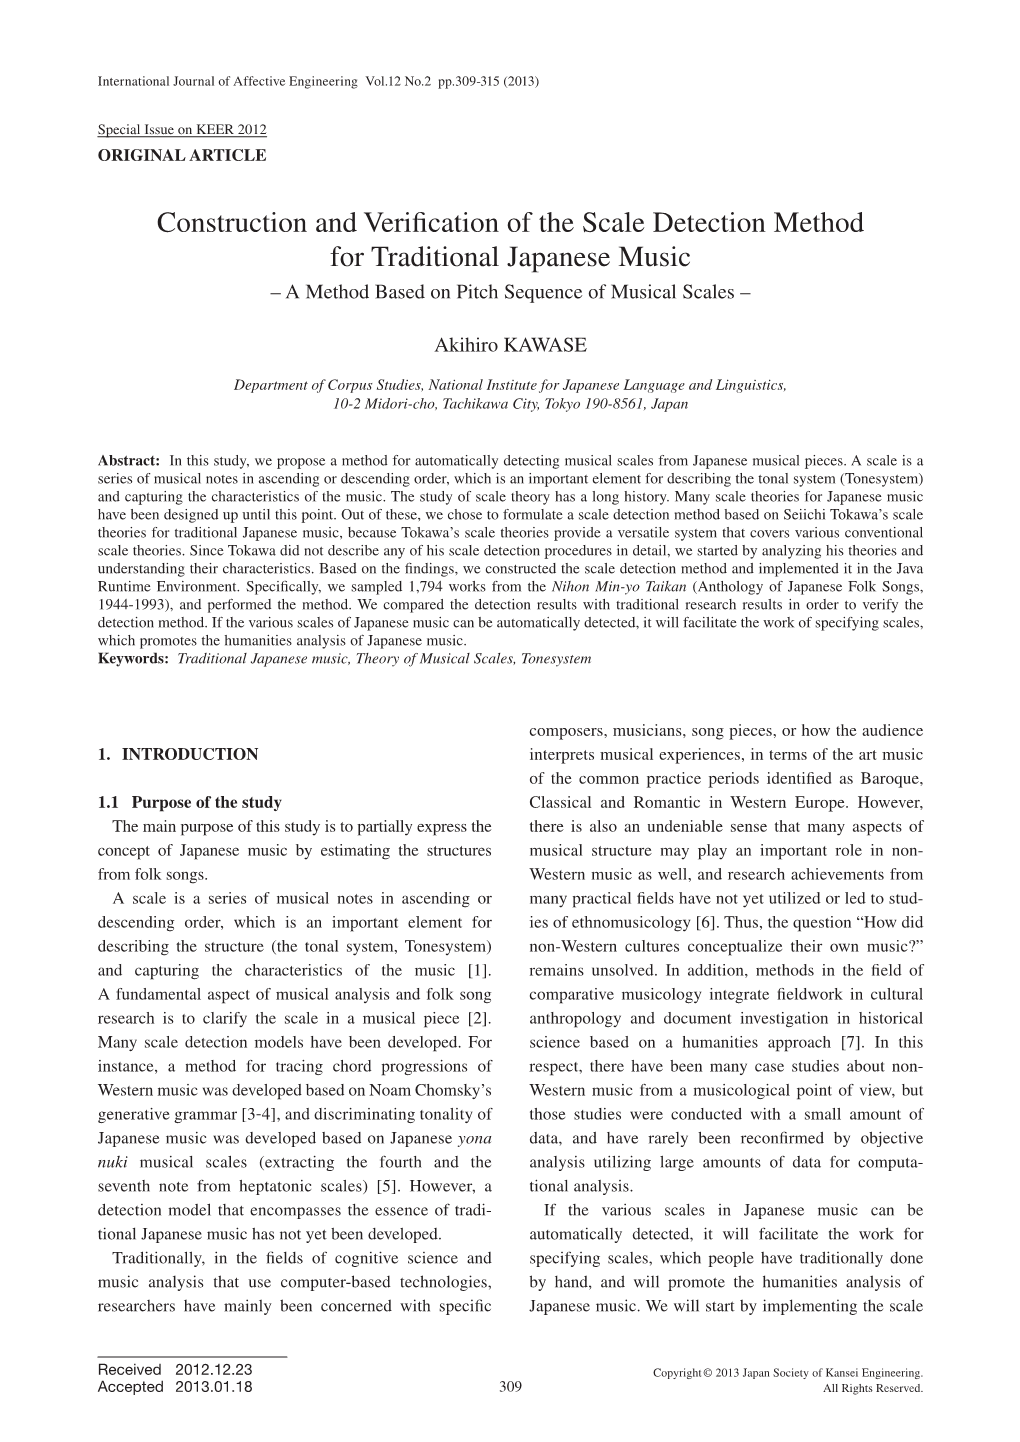 Construction and Verification of the Scale Detection Method for Traditional Japanese Music – a Method Based on Pitch Sequence of Musical Scales –